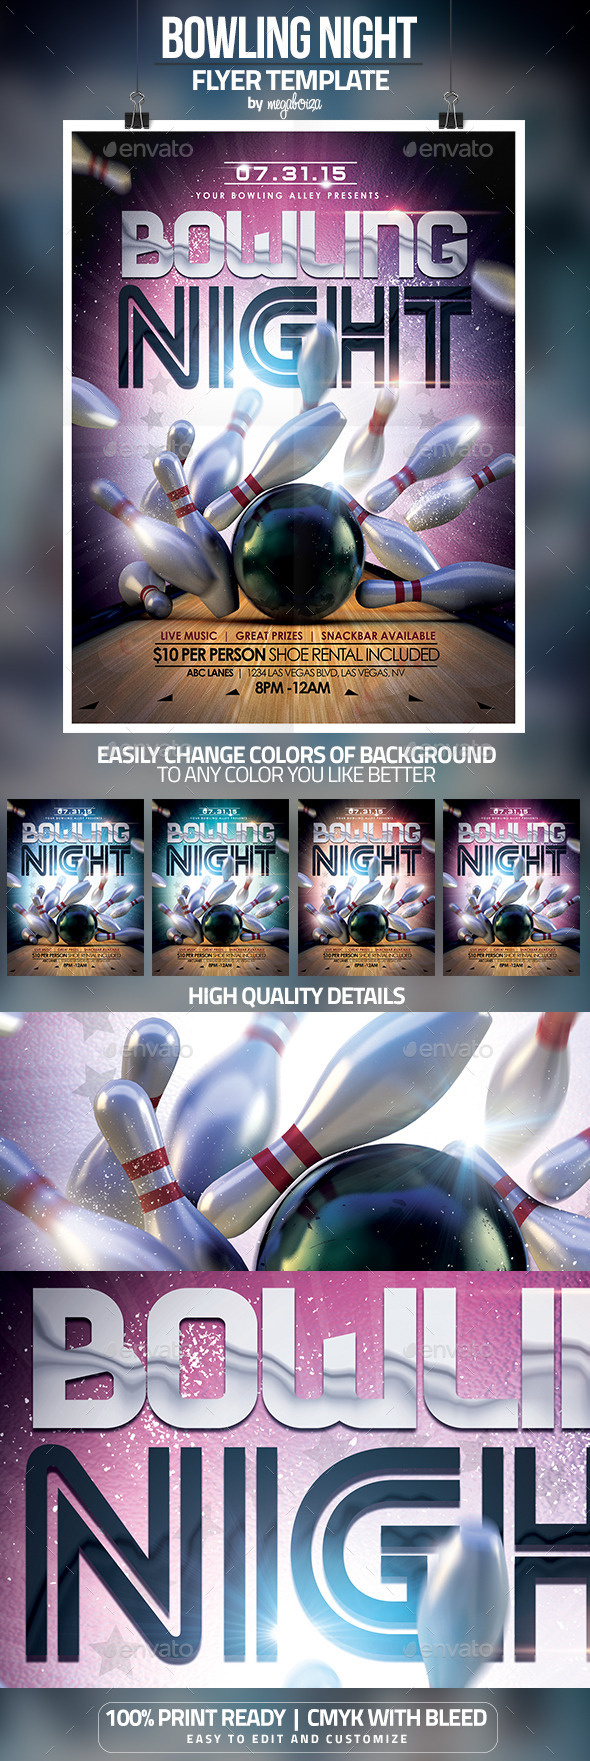 Bowling Night Flyer / Poster Template